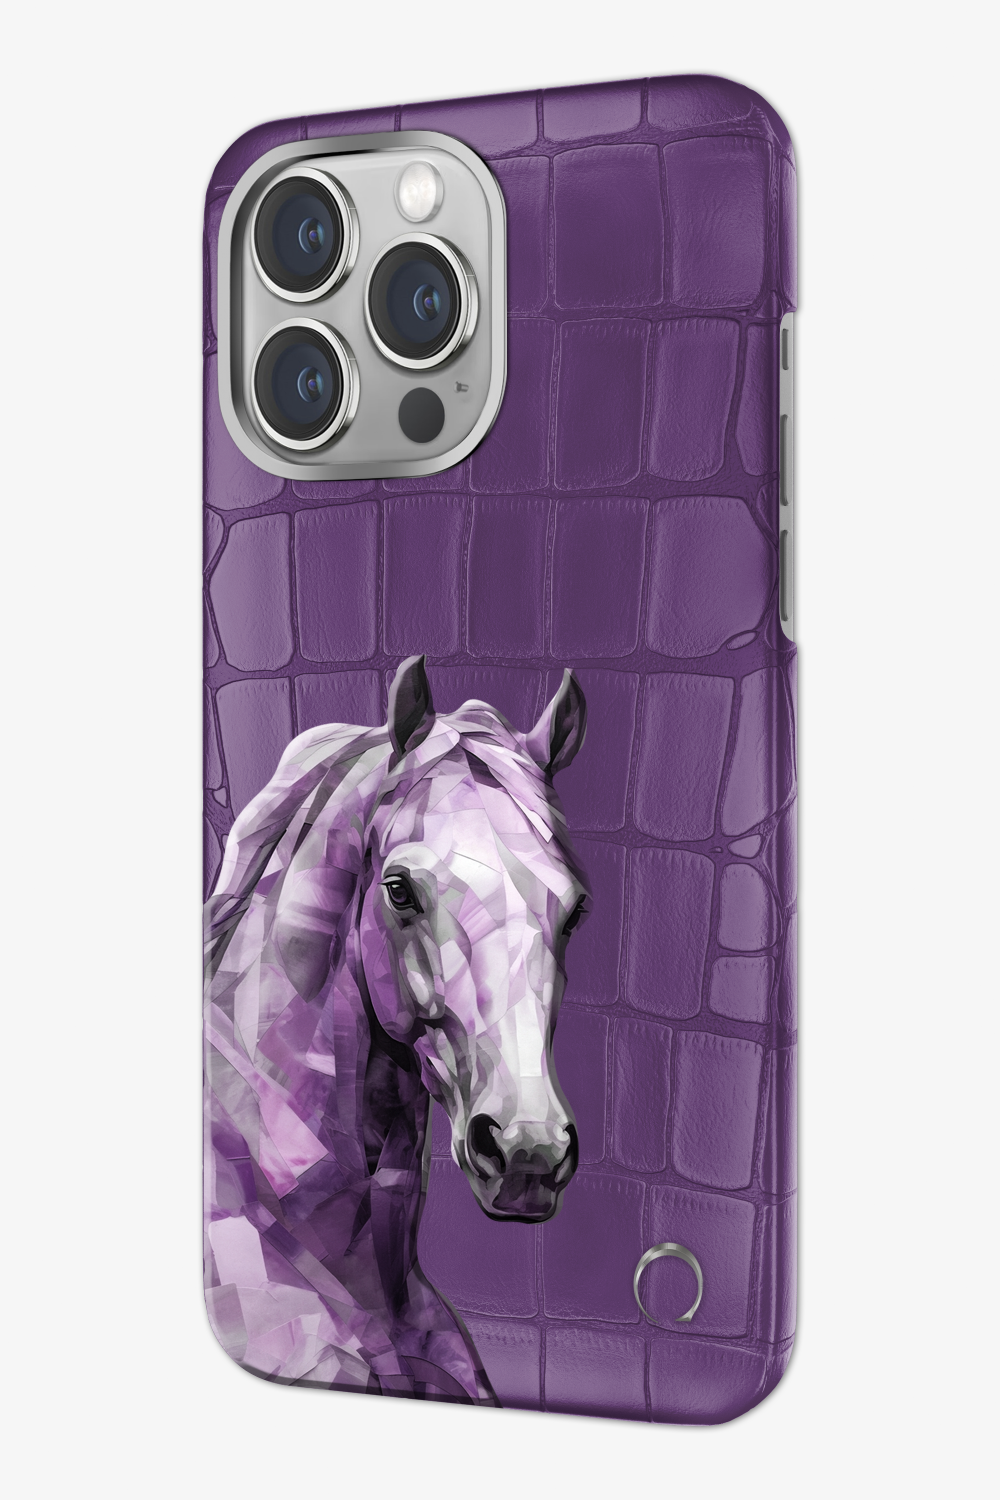 Horse Painting Purple Alligator Case for iPhone 14 Series - Horse Painting Purple Alligator Case for iPhone 14 Series - zollofrance